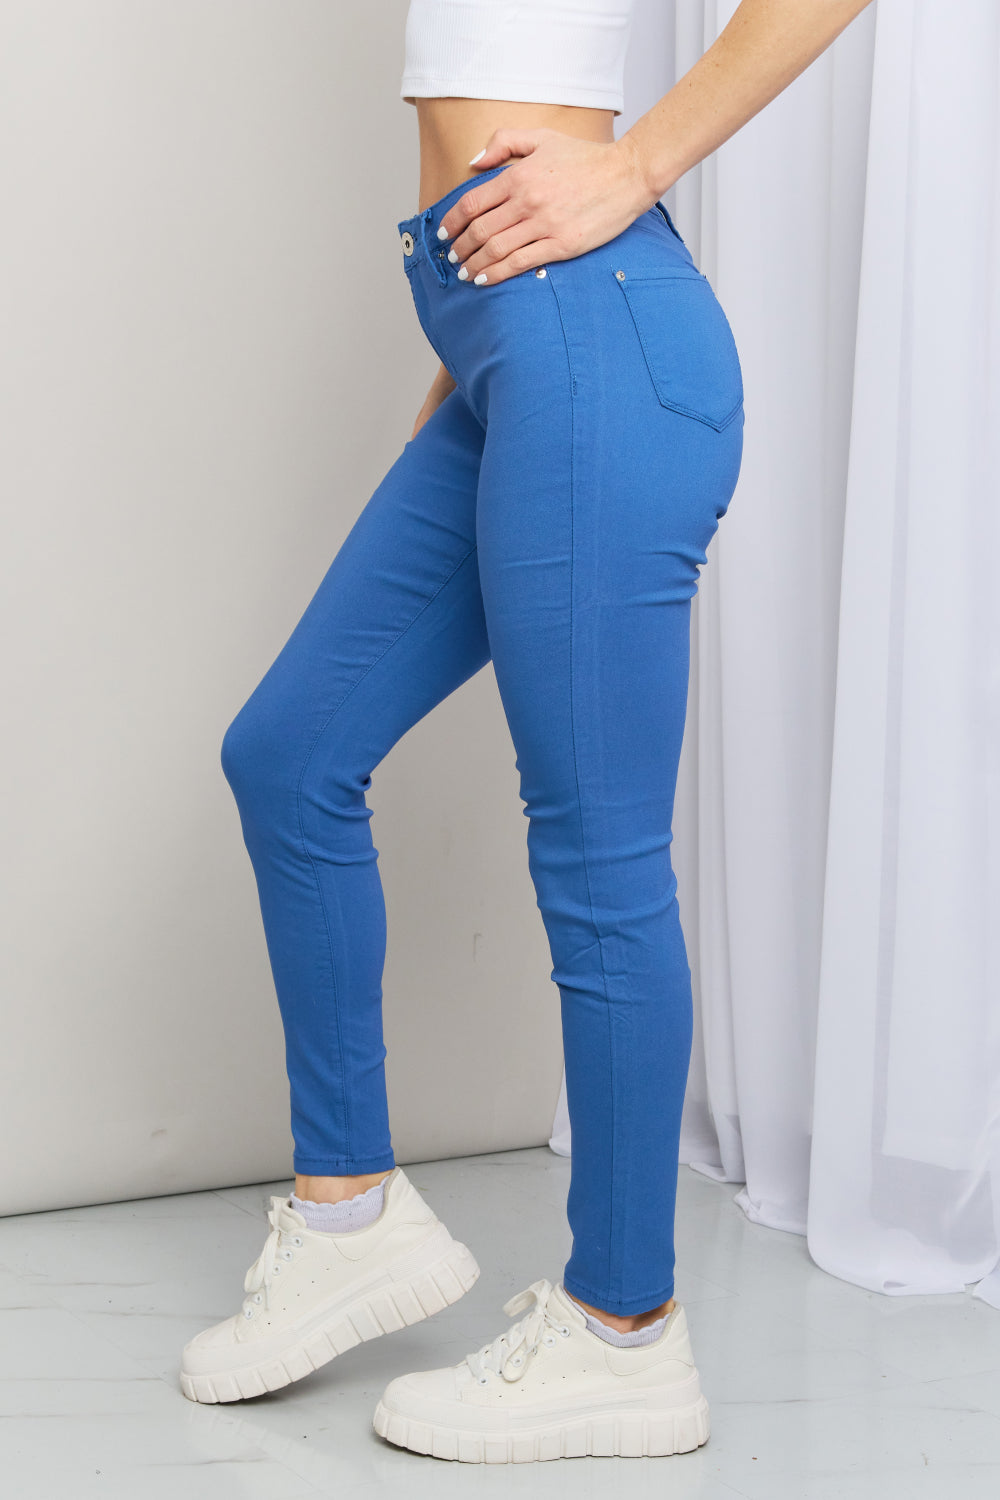 YMI Jeanswear Kate Hyper-Stretch Full Size Mid-Rise Skinny Jeans in Electric Blue COCO CRESS